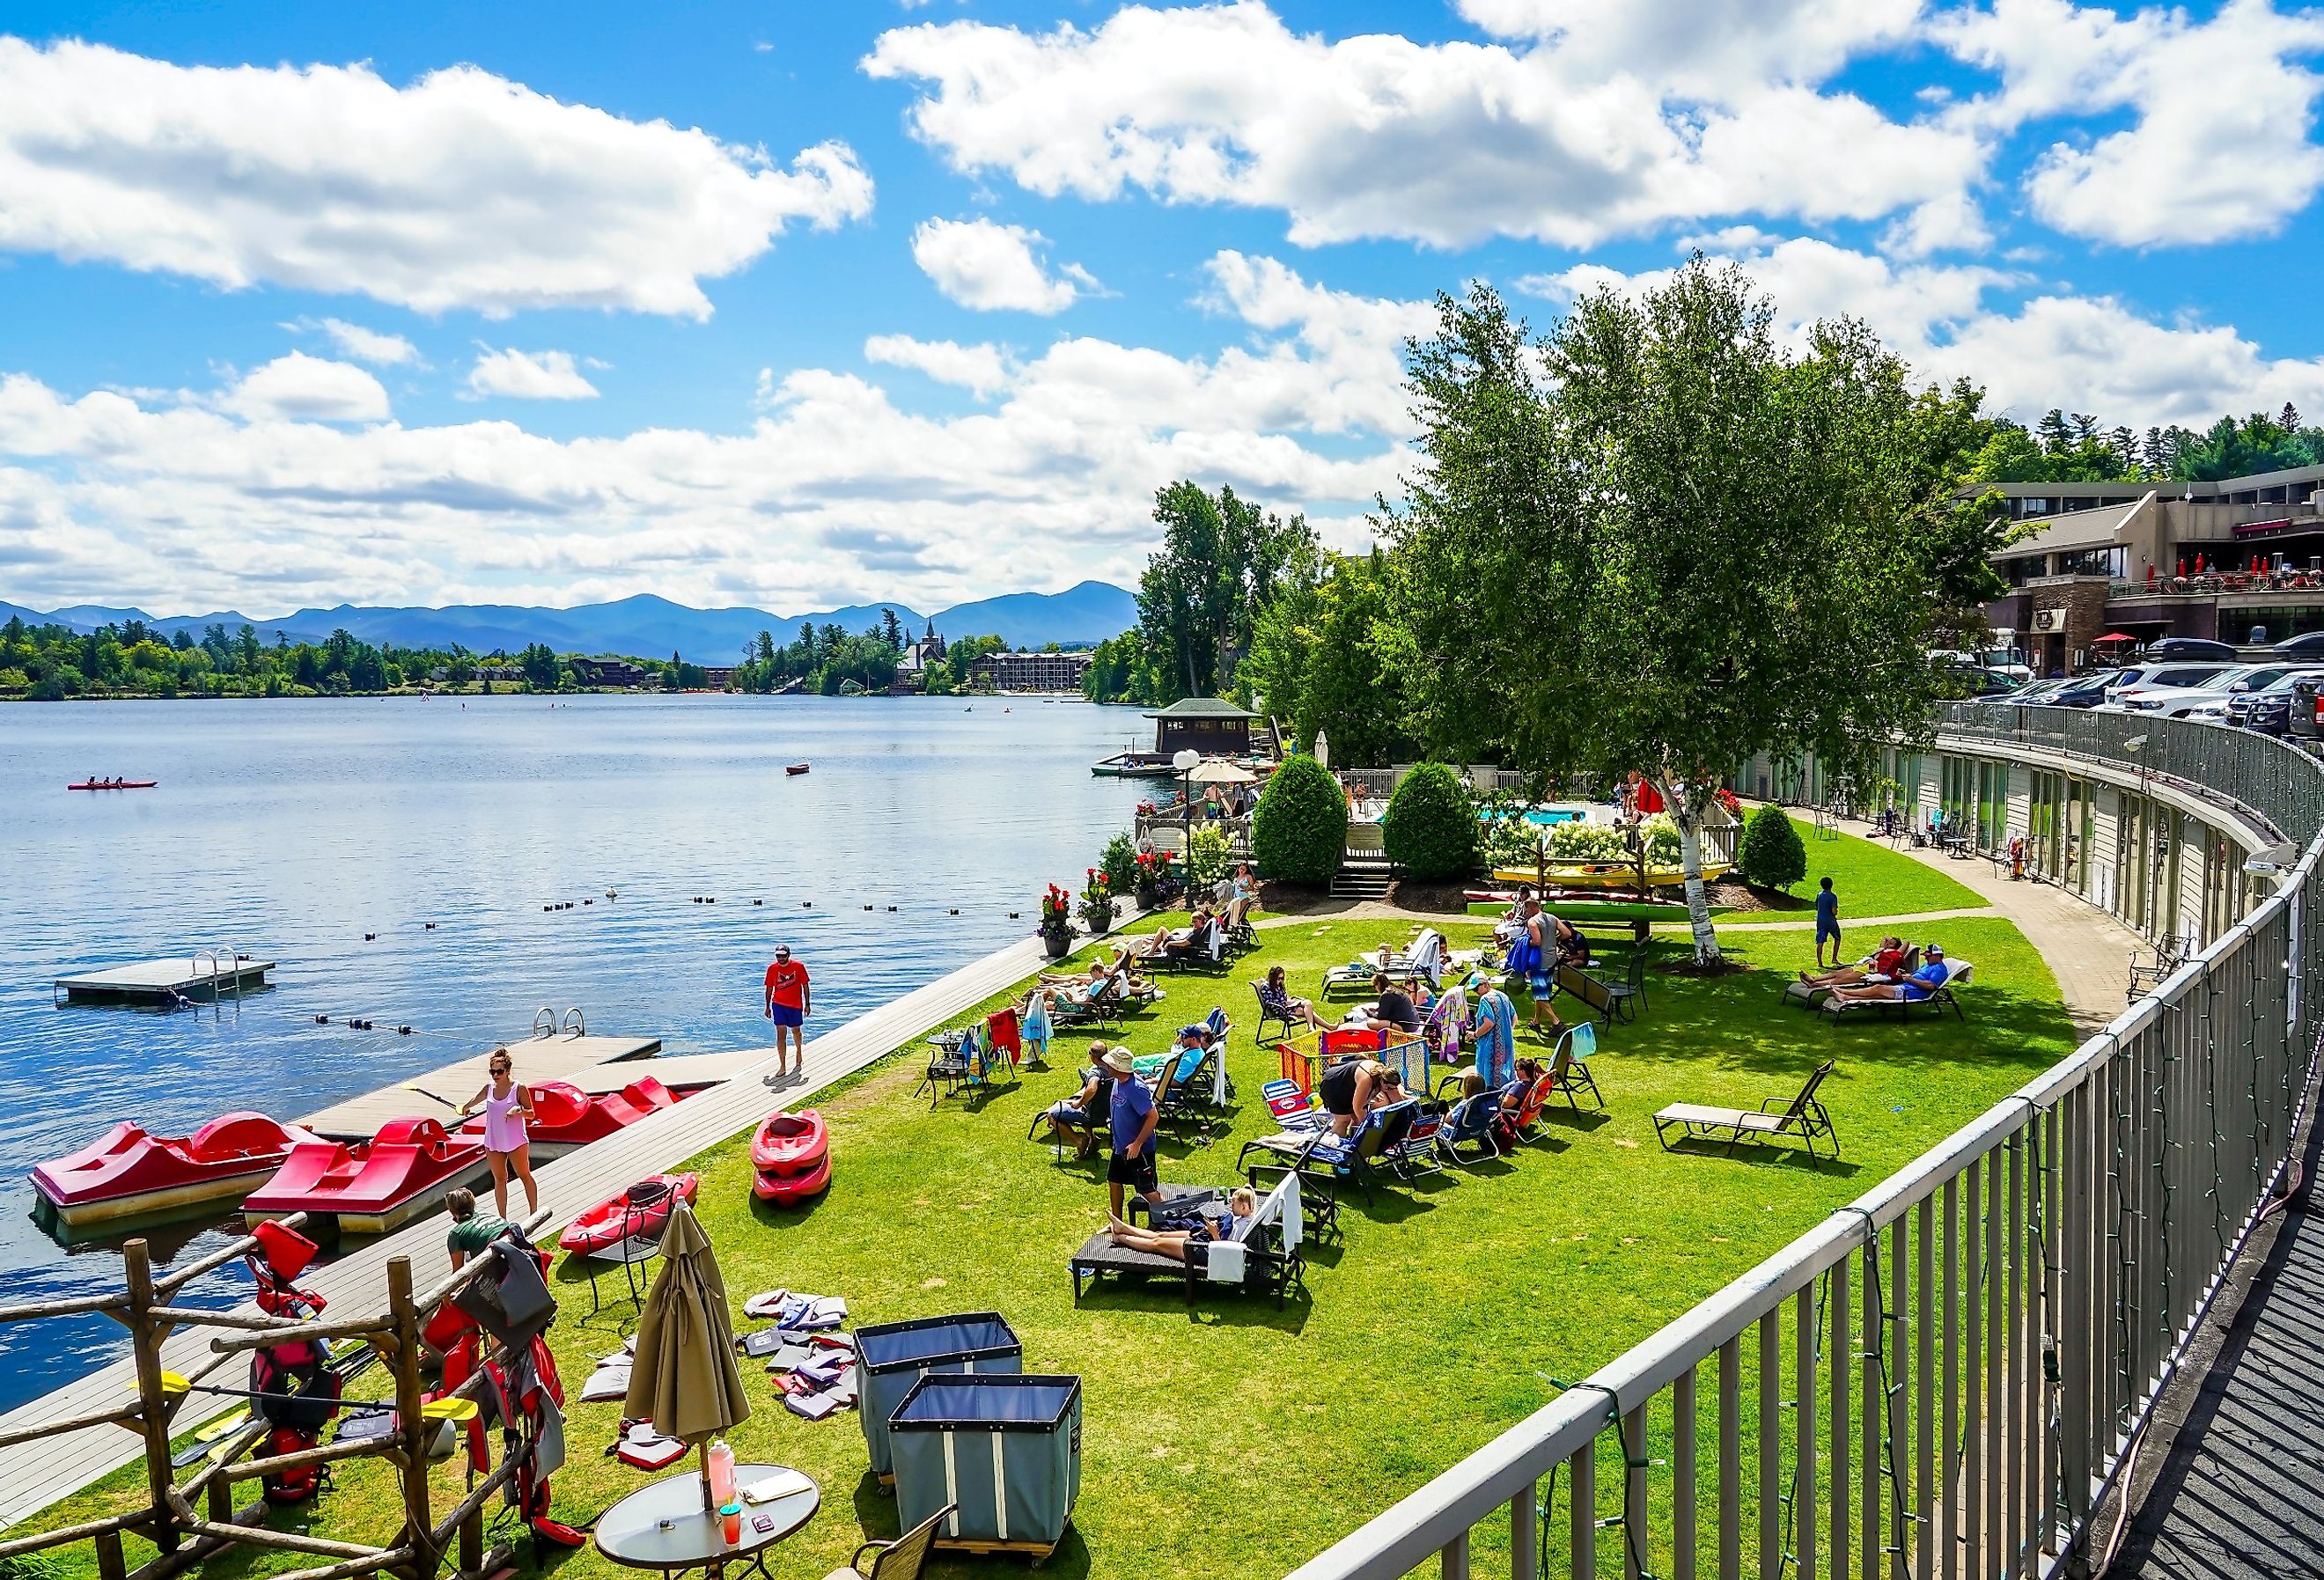 Beach at Mirror Lake in Lake Placid, upstate New York, with tourists and boat rentals. Image credit Leonard Zhukovsky via Shutterstock.